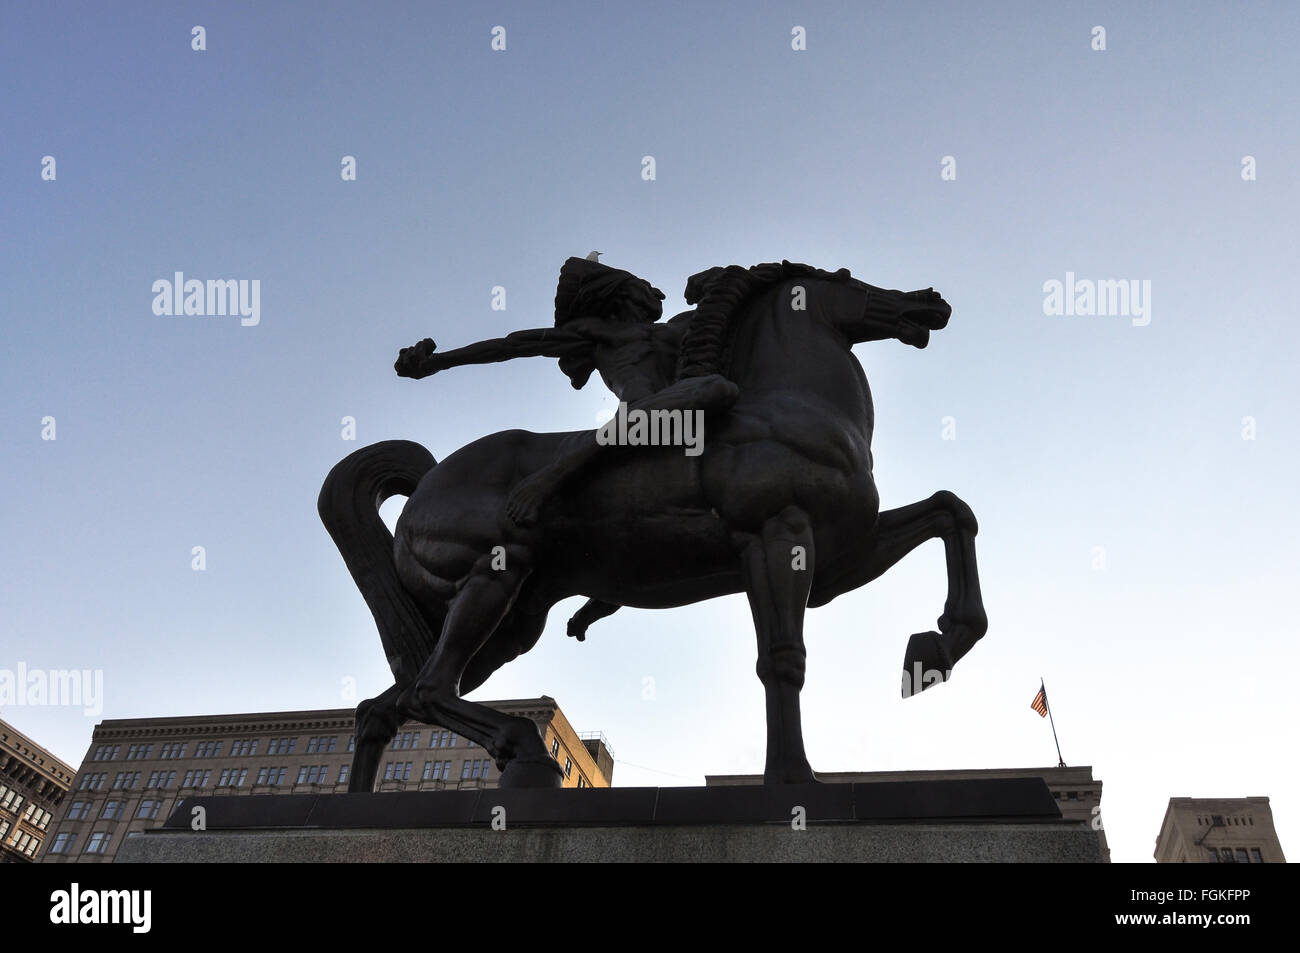 Chicago,Illinois,USA - August 16, 2013 : The Spearman Statue in backlight, Chicago Stock Photo